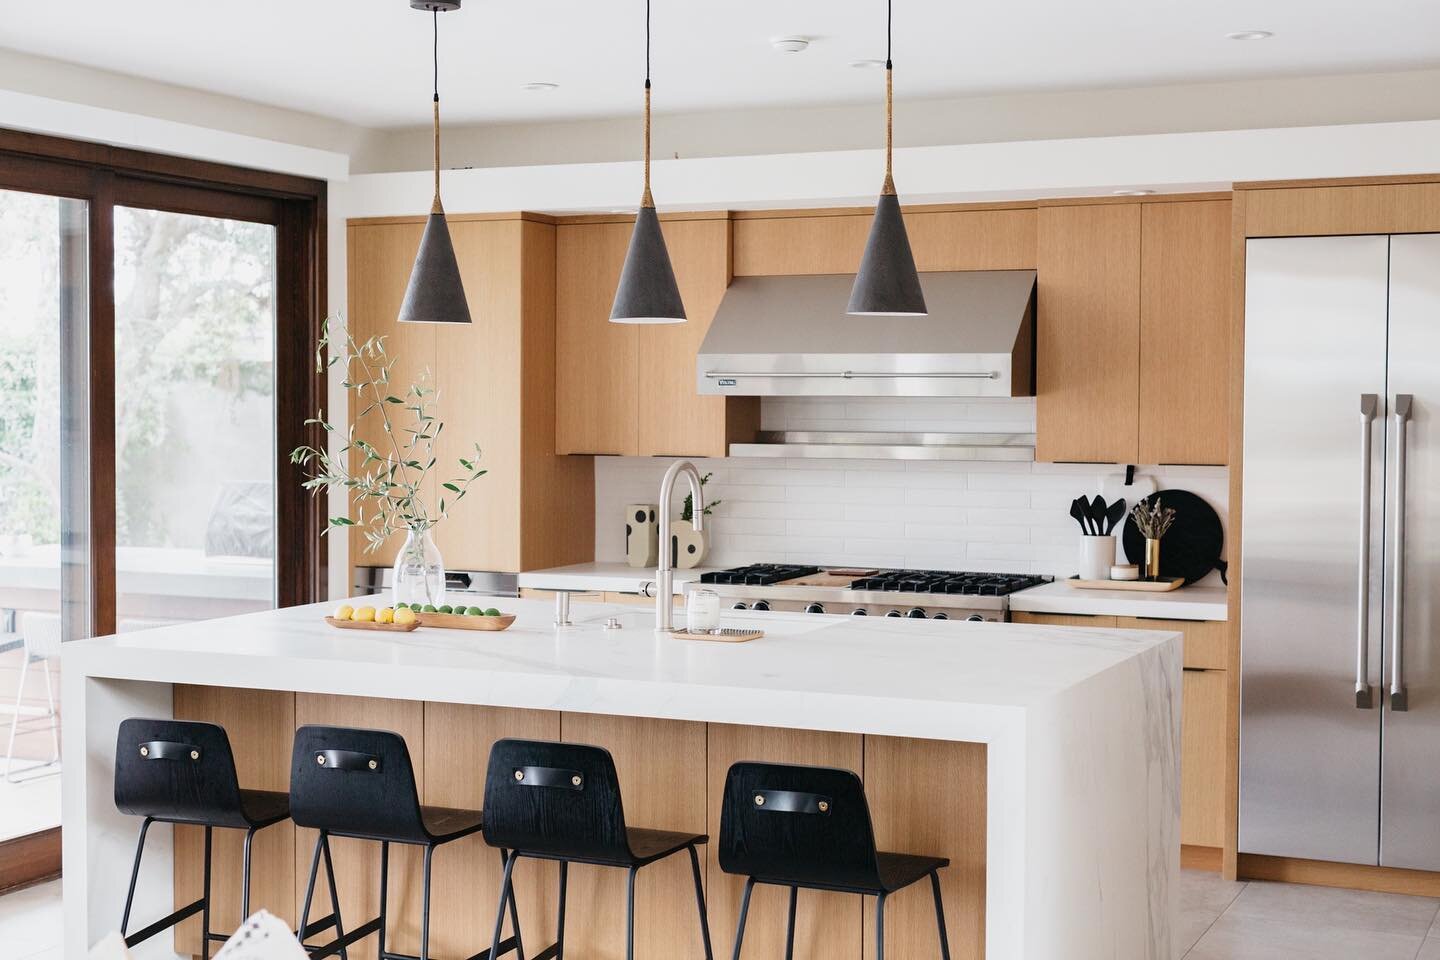 Kitchen roundup from some of our past projects.  We love a warm+ modern CALI kitchen vibe!  Did you buy your @newportharborhometour tickets yet?  Come see what we have been up to.  Our #FIXExLidoPoolHouse is on the tour!

1️⃣#FIXExAntiguaWay
2️⃣#FIXE